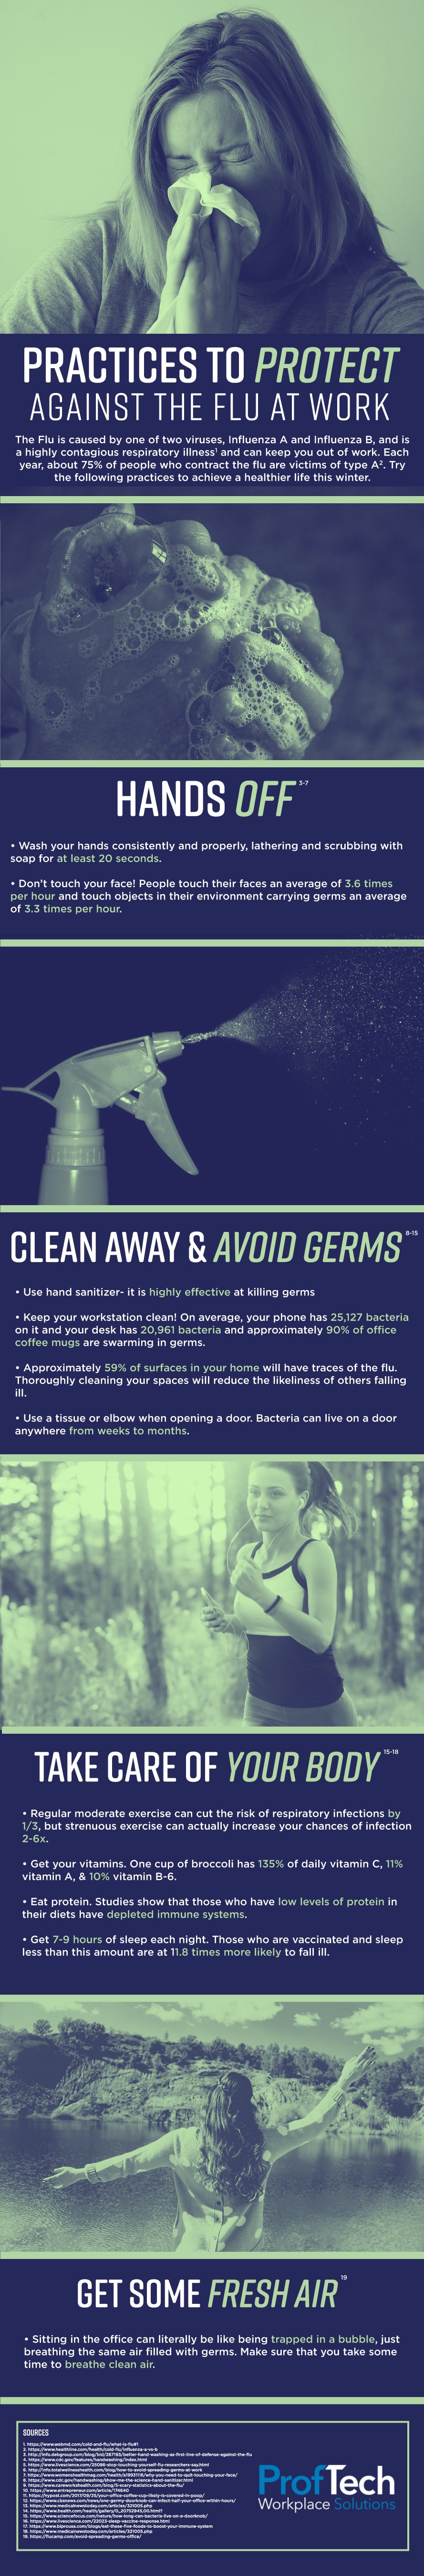 Proftech Practices To Protect Against The Flu At Work [Infographic]